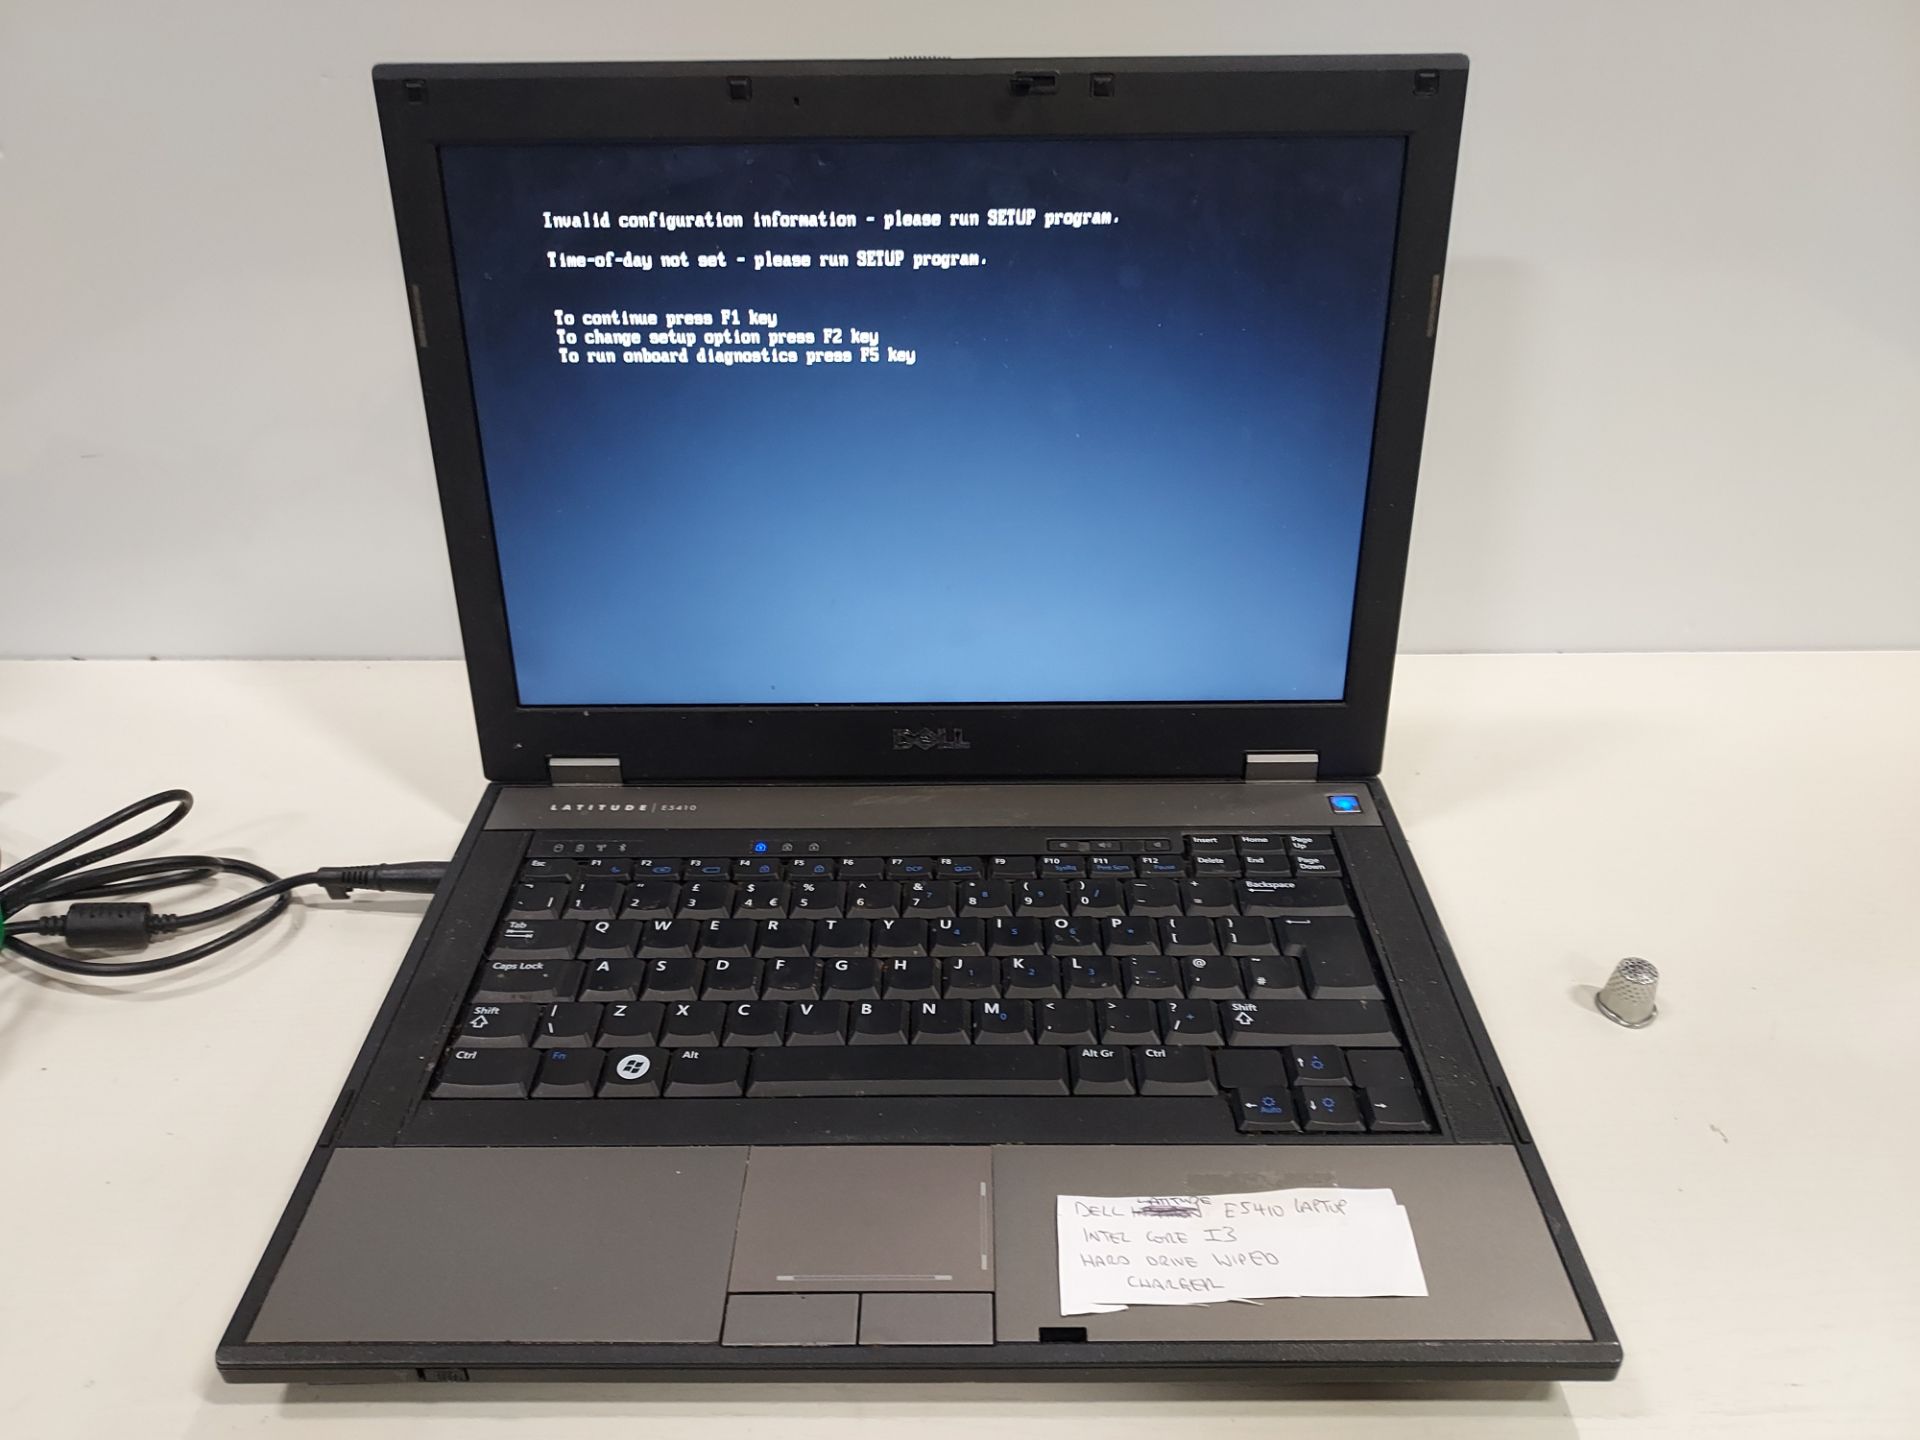 1 X DELL LATITUDE E5410 LAPTOP - INTEL CORE I3 - HARD DRIVE WIPED - NO OS- WITH CHARGER